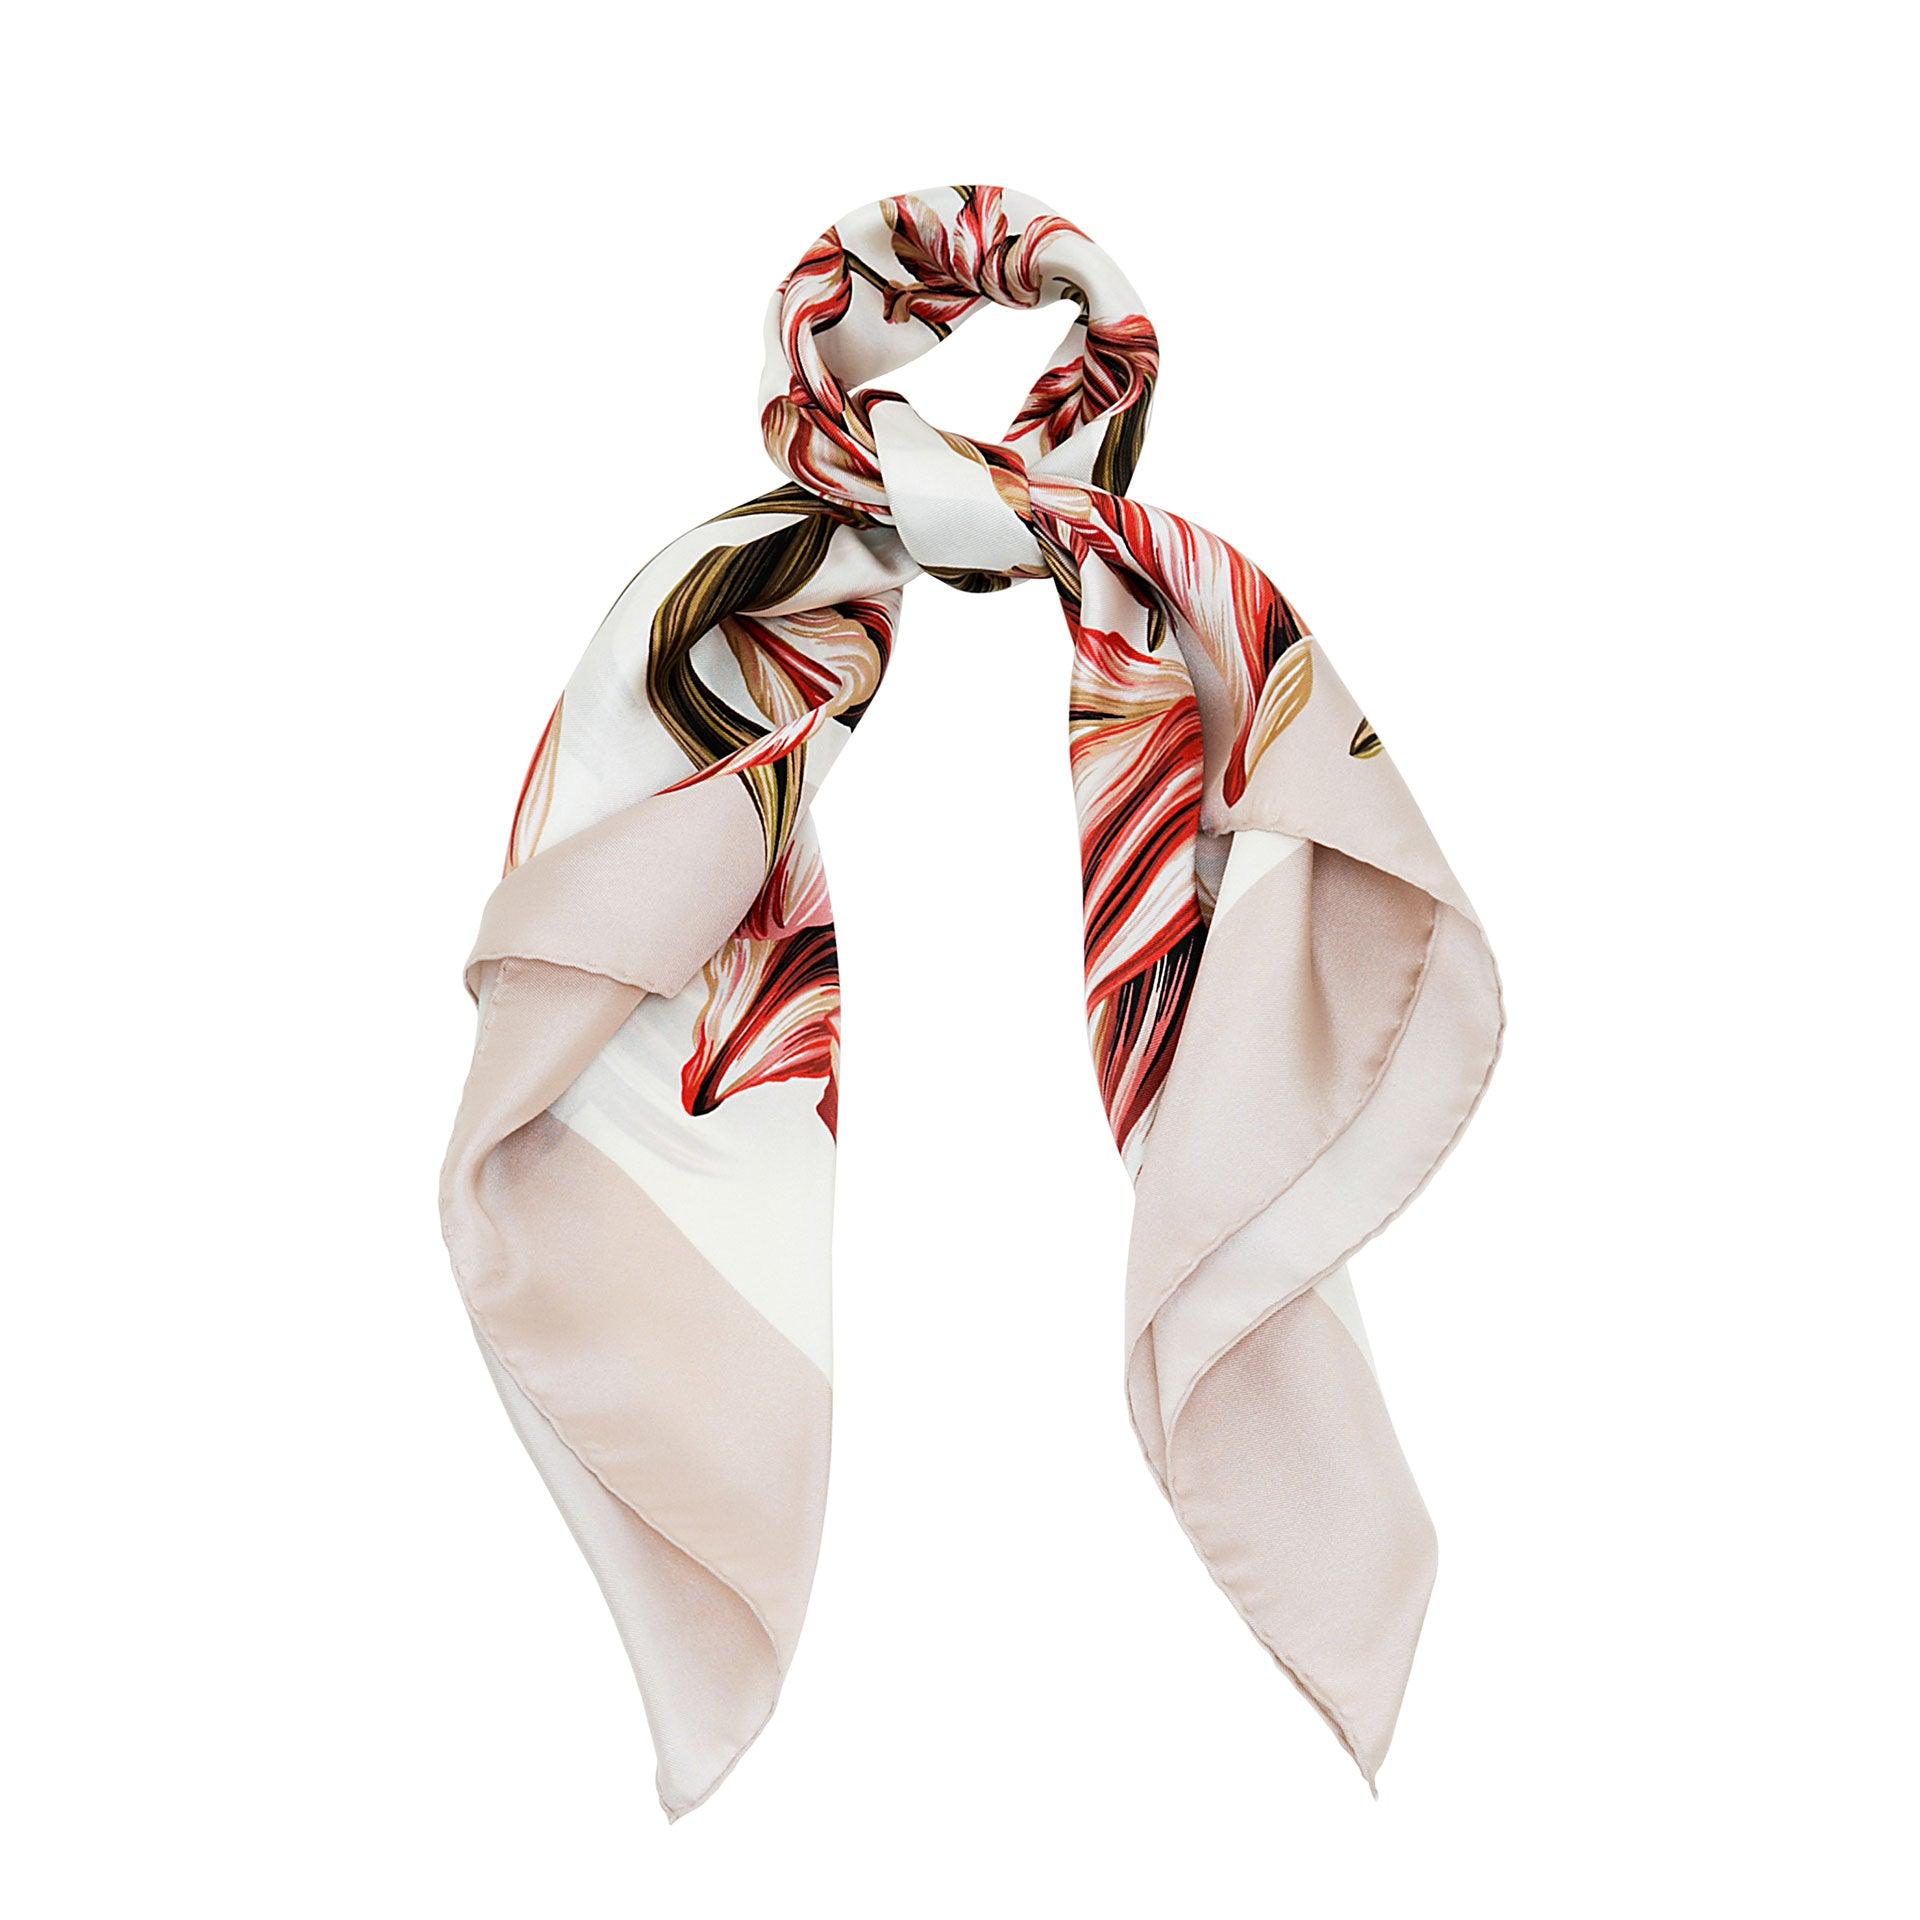 Dusty Pink British Tulip Garden Silk Scarf - Fusion of London's design and Italian craftsmanship, an exquisite gift choice.